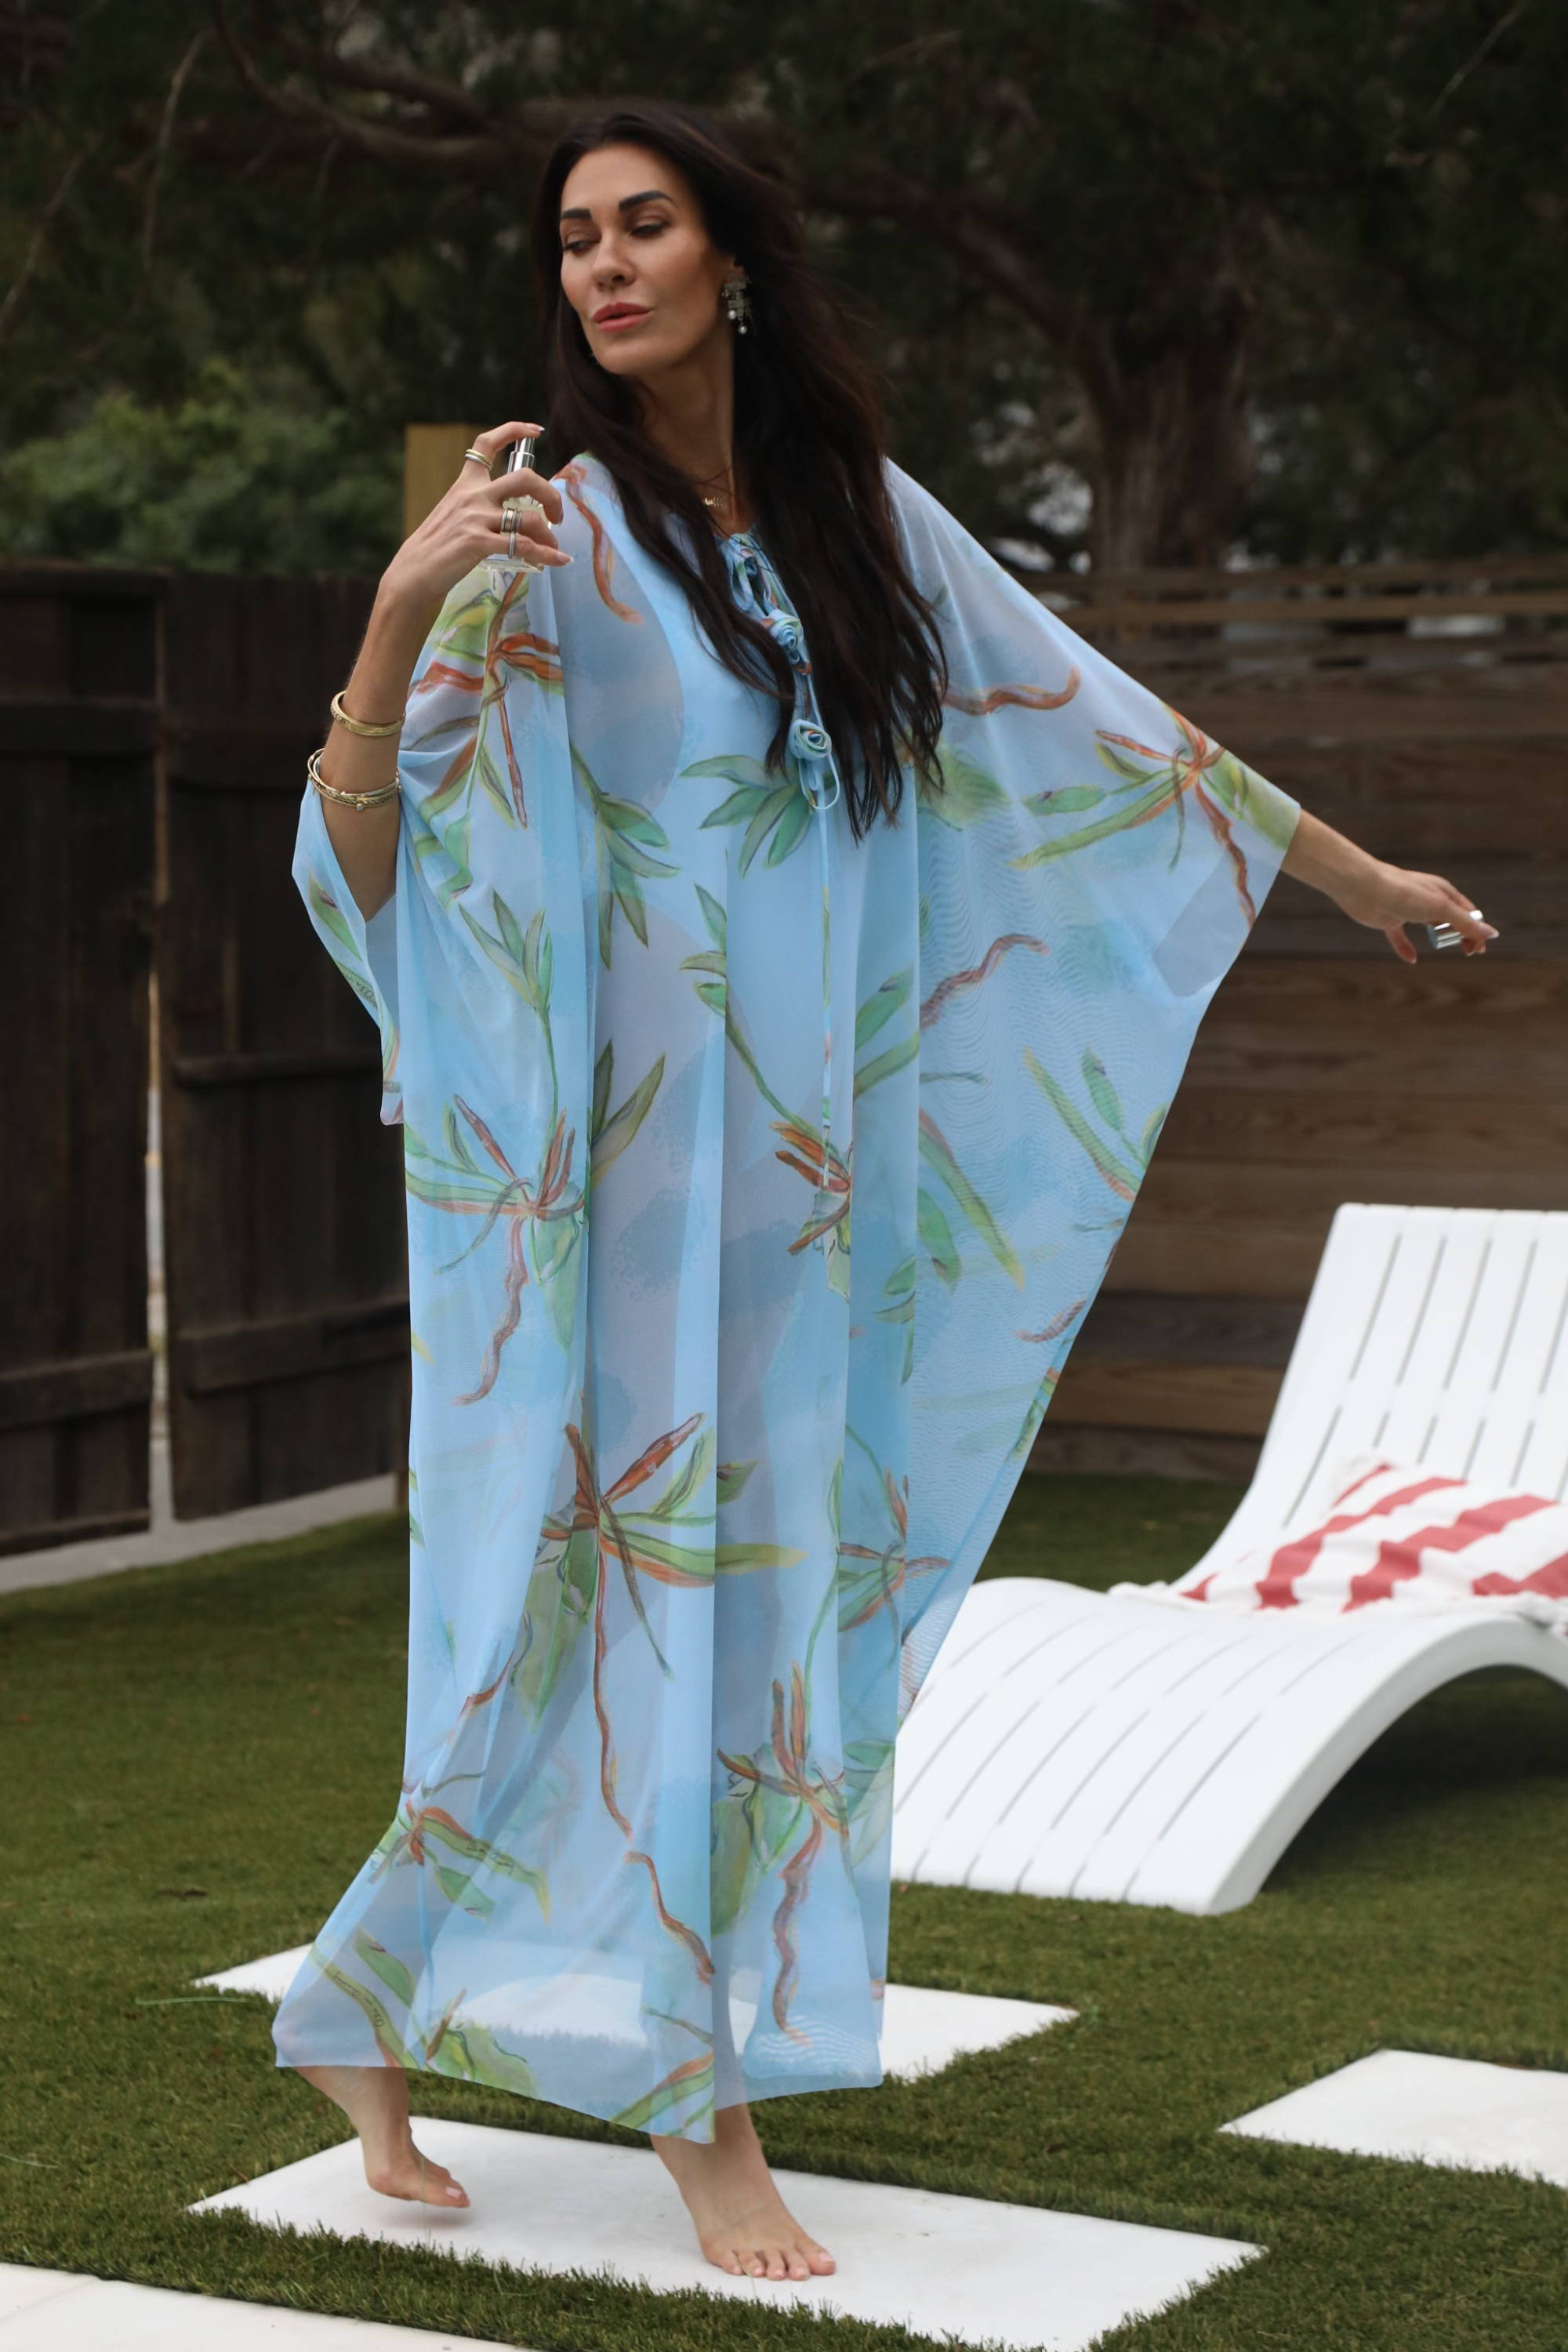 Muffy founder of the Buzz Skin wearing mesh bathing suit cover up with her fragrance by the pool by Ala von Auersperg